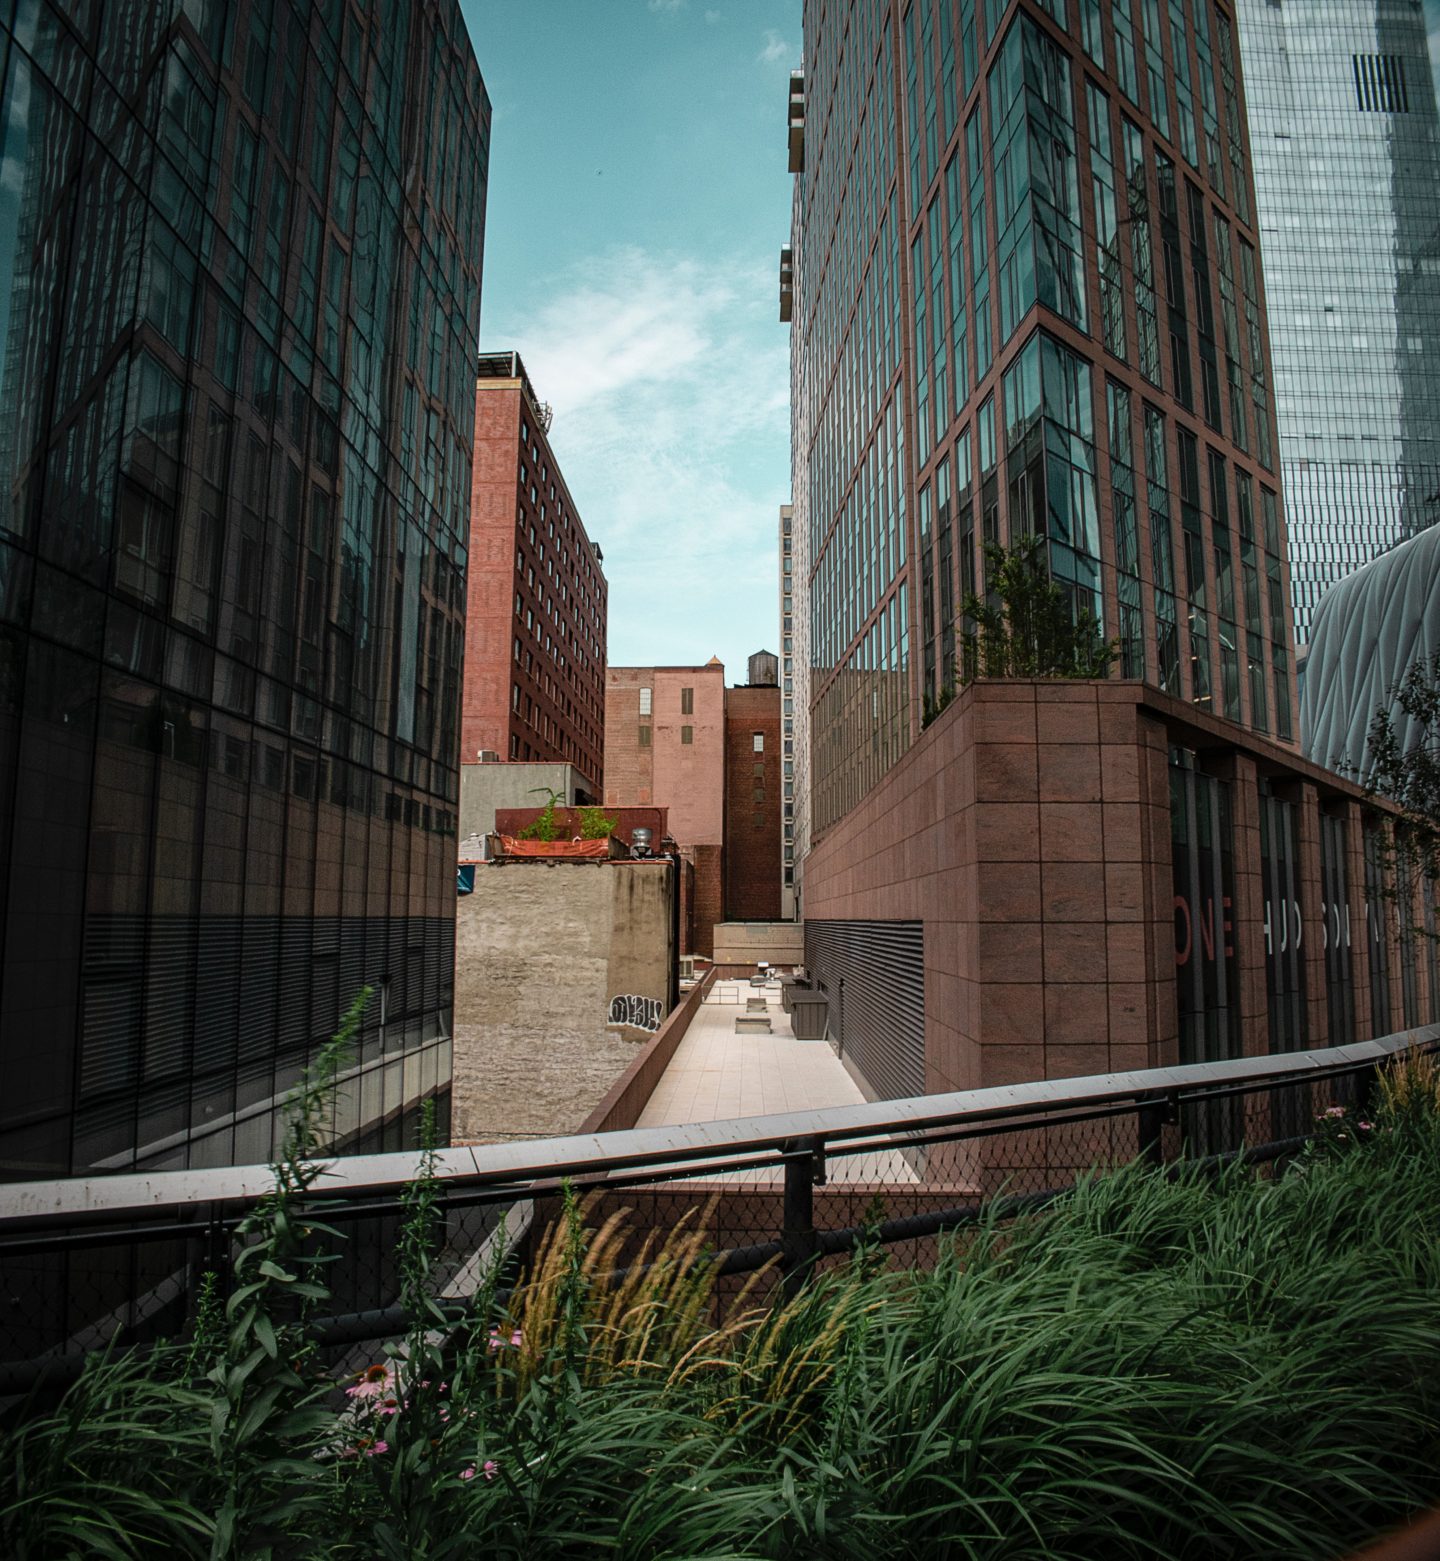 The High Line is a great free activity in NYC that offers a walking path and stunning views along the way